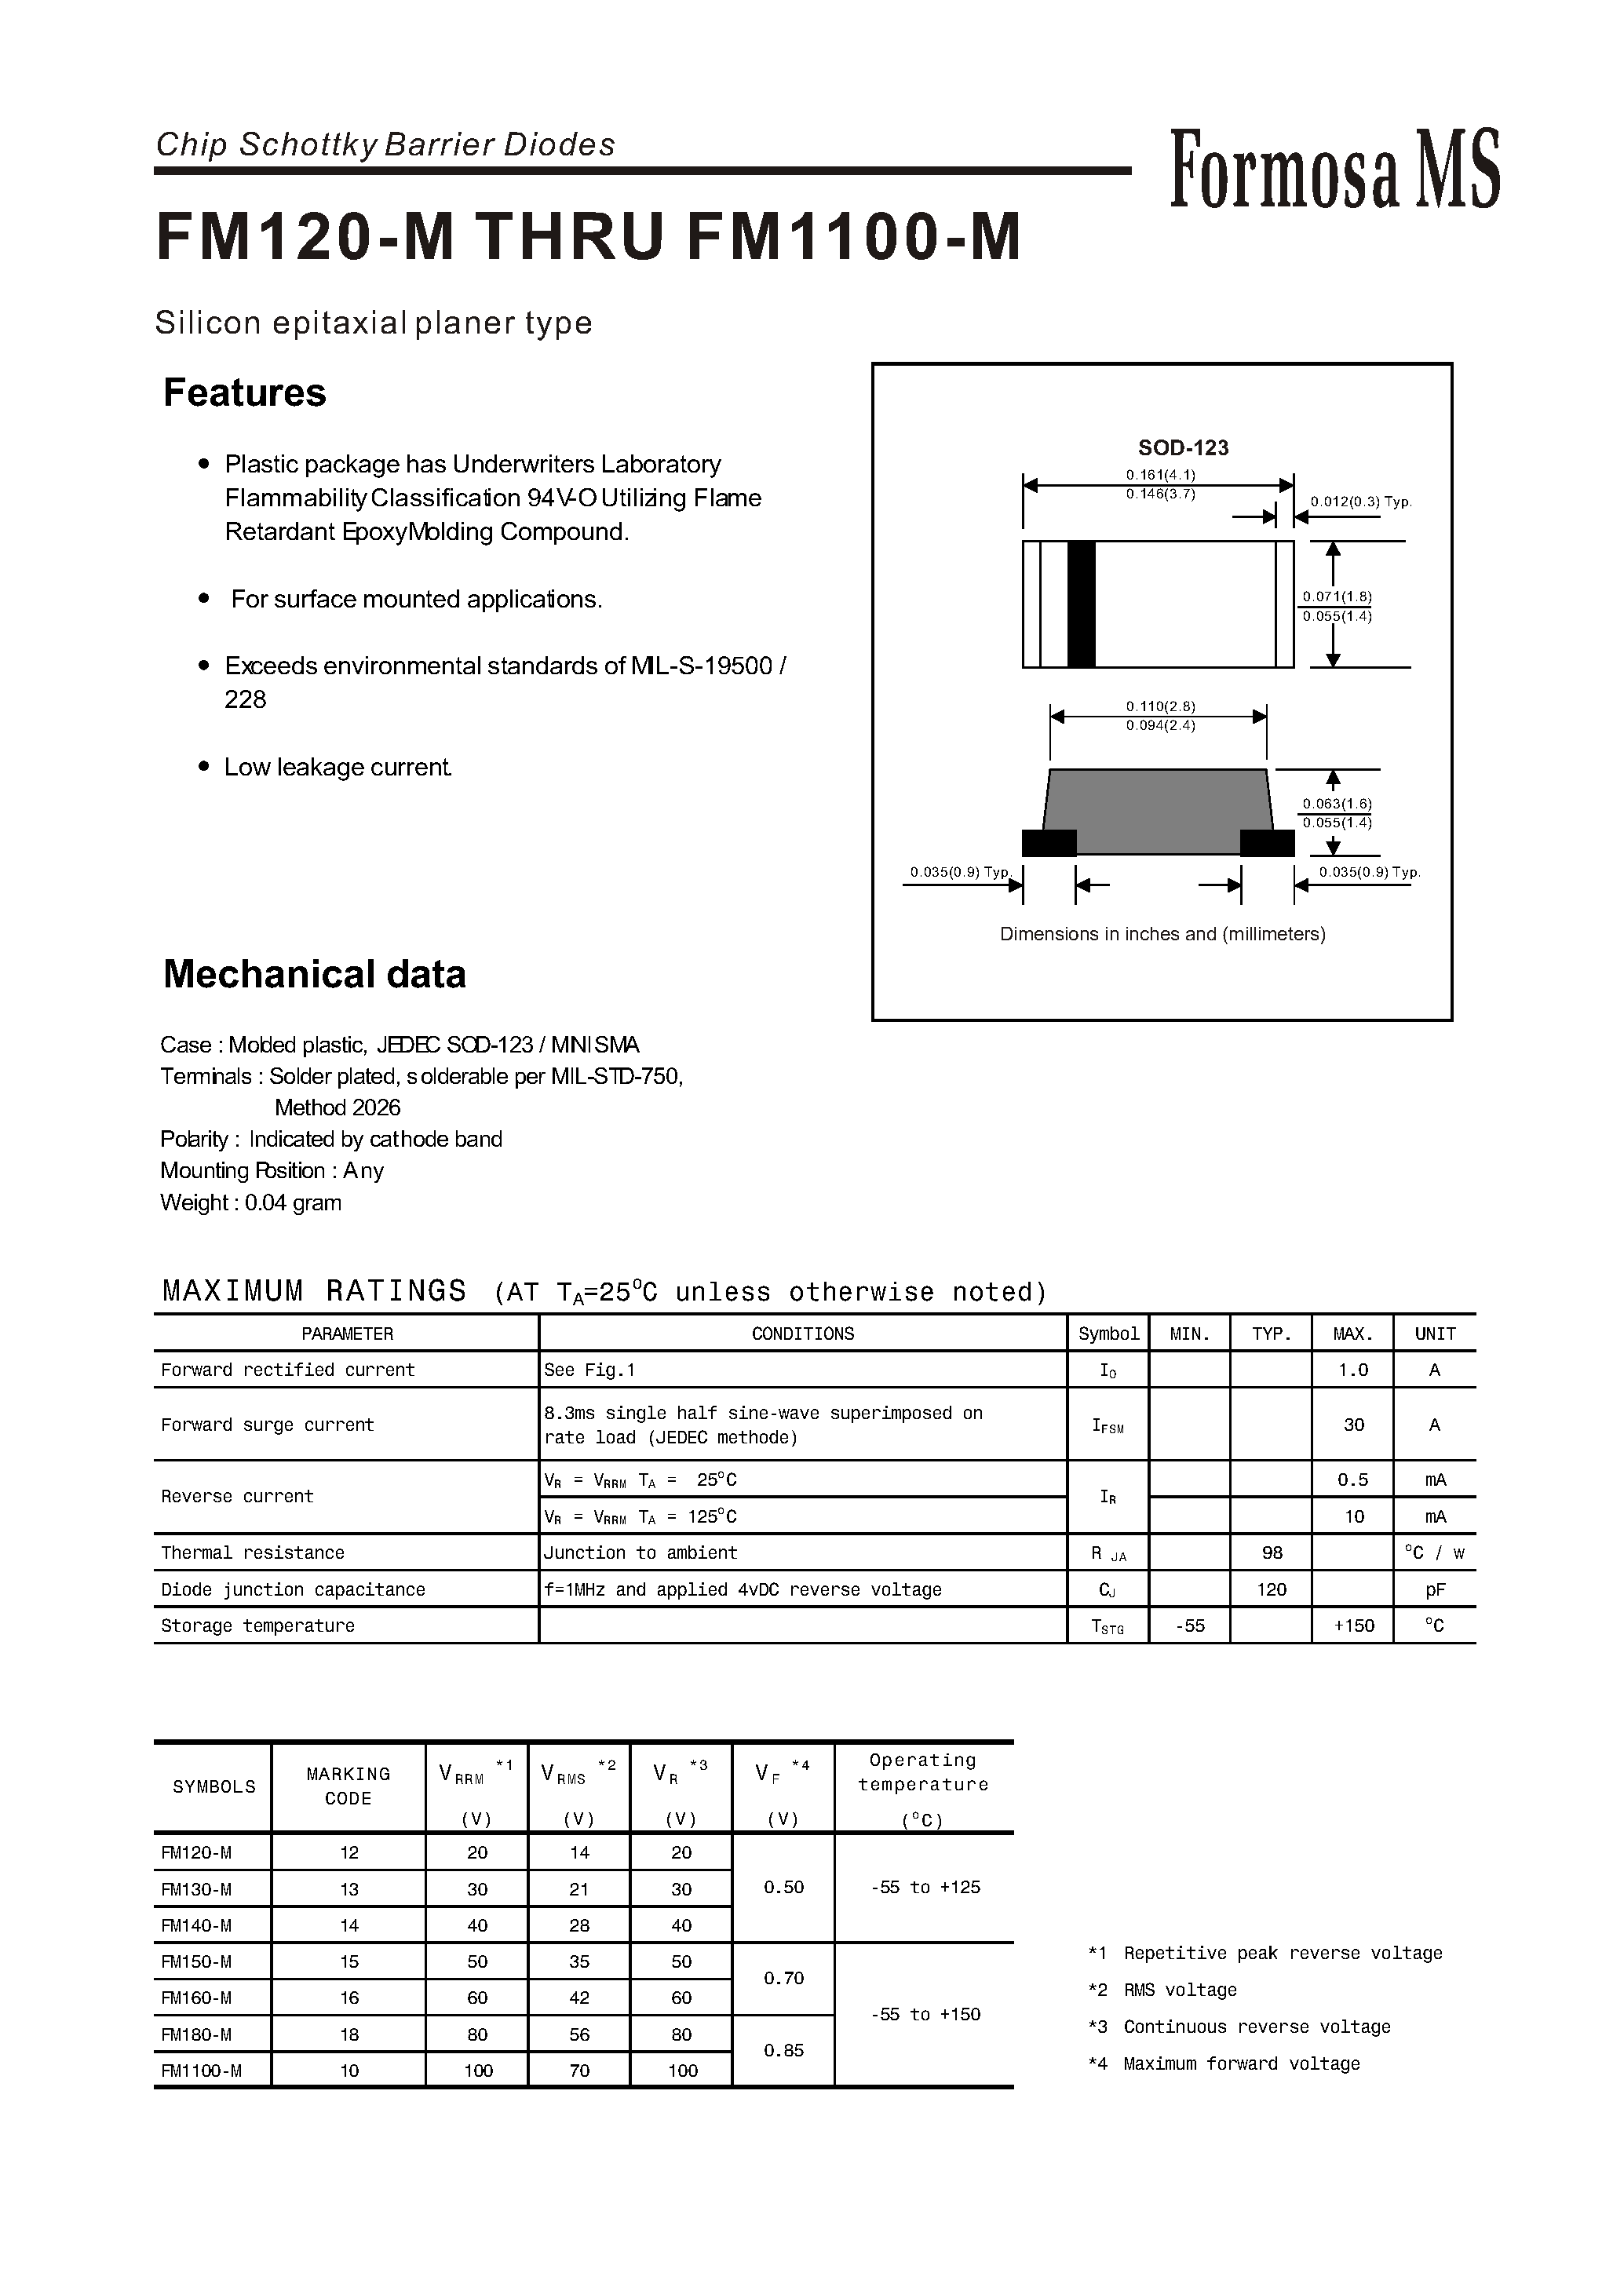 Datasheet FM130-M - Silicon epitaxial planer type page 1